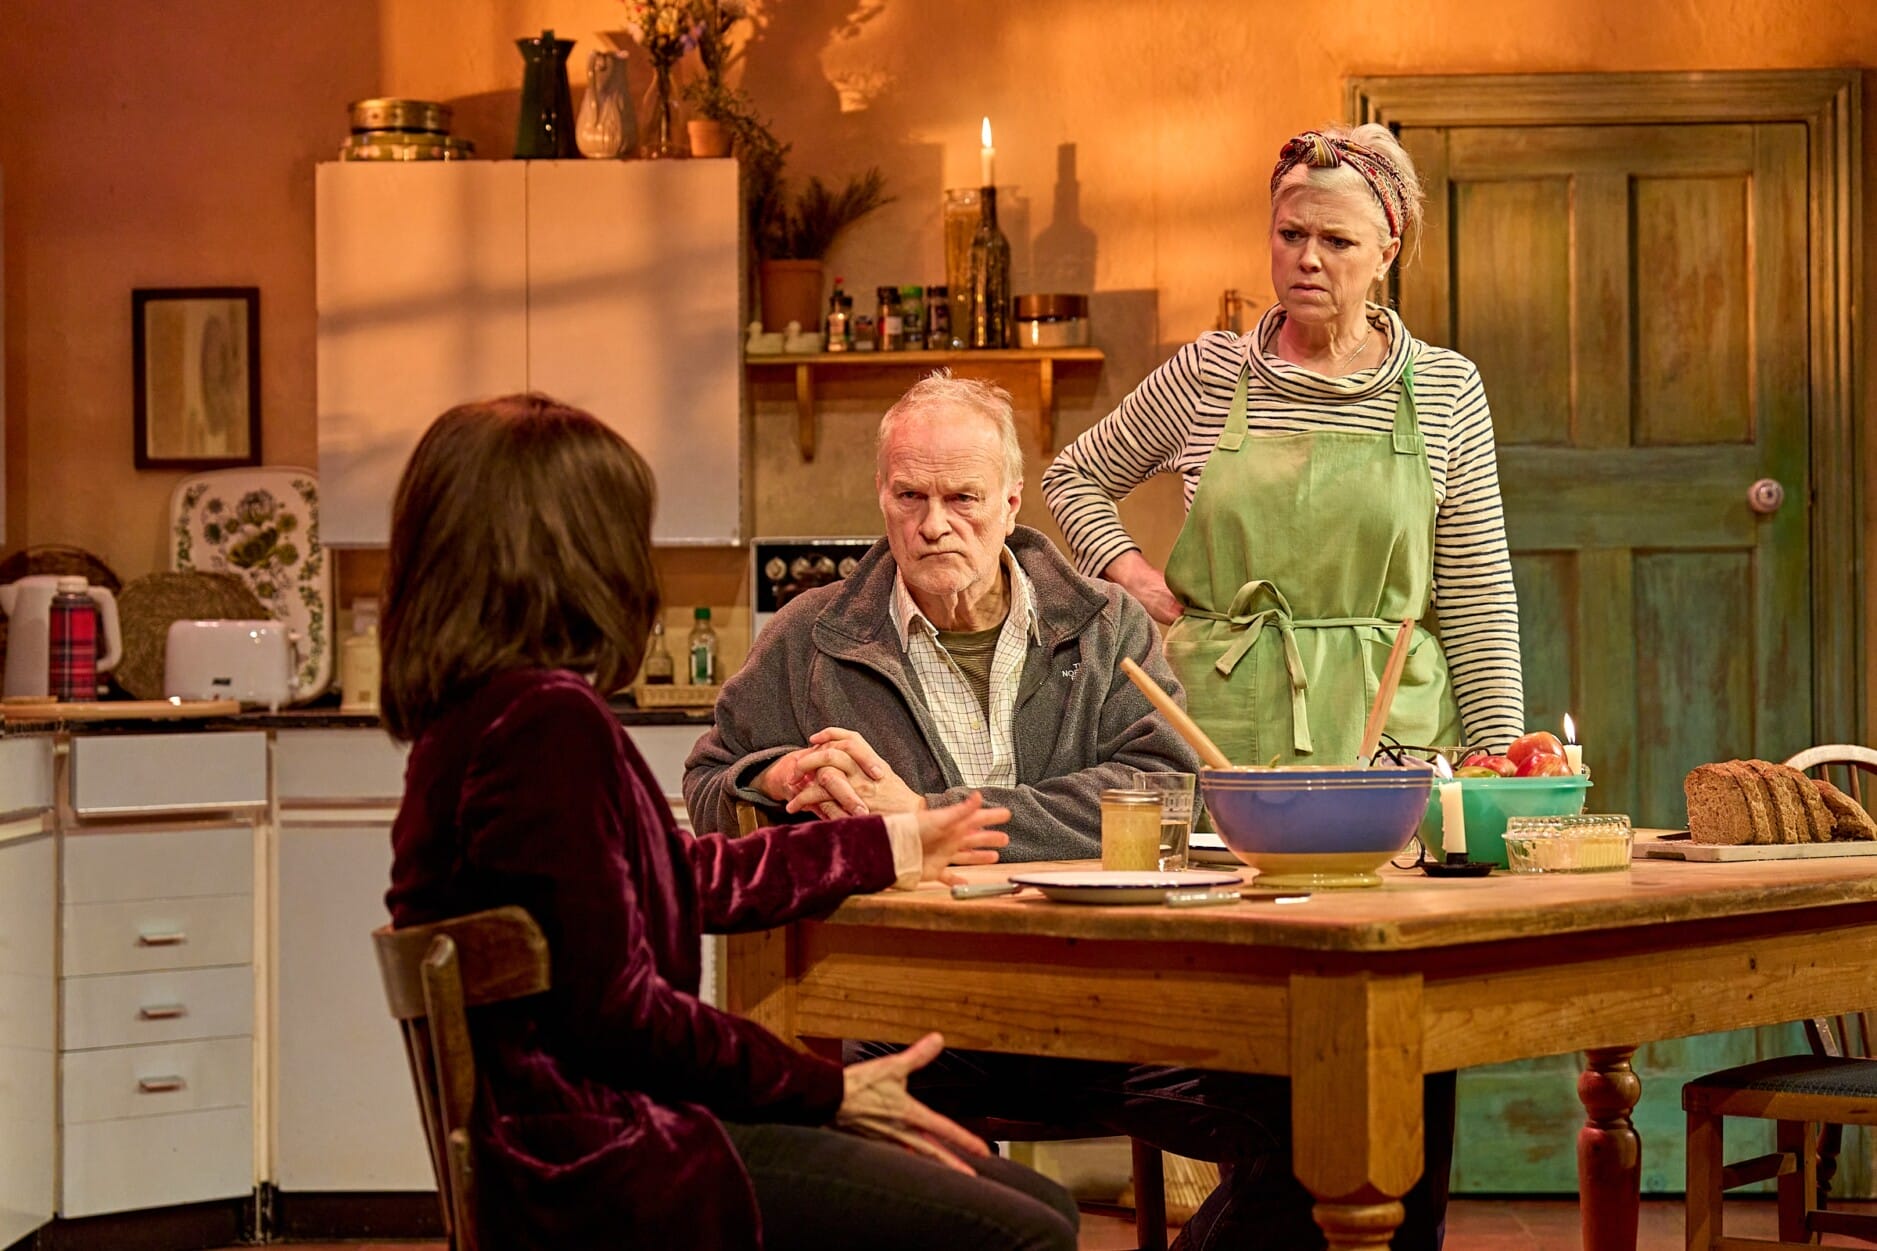 Sally Dexter as Rose, Clive Mantle as Robin and Caroline Harker as Hazel in The Children. Photo by Manuel Harlan.